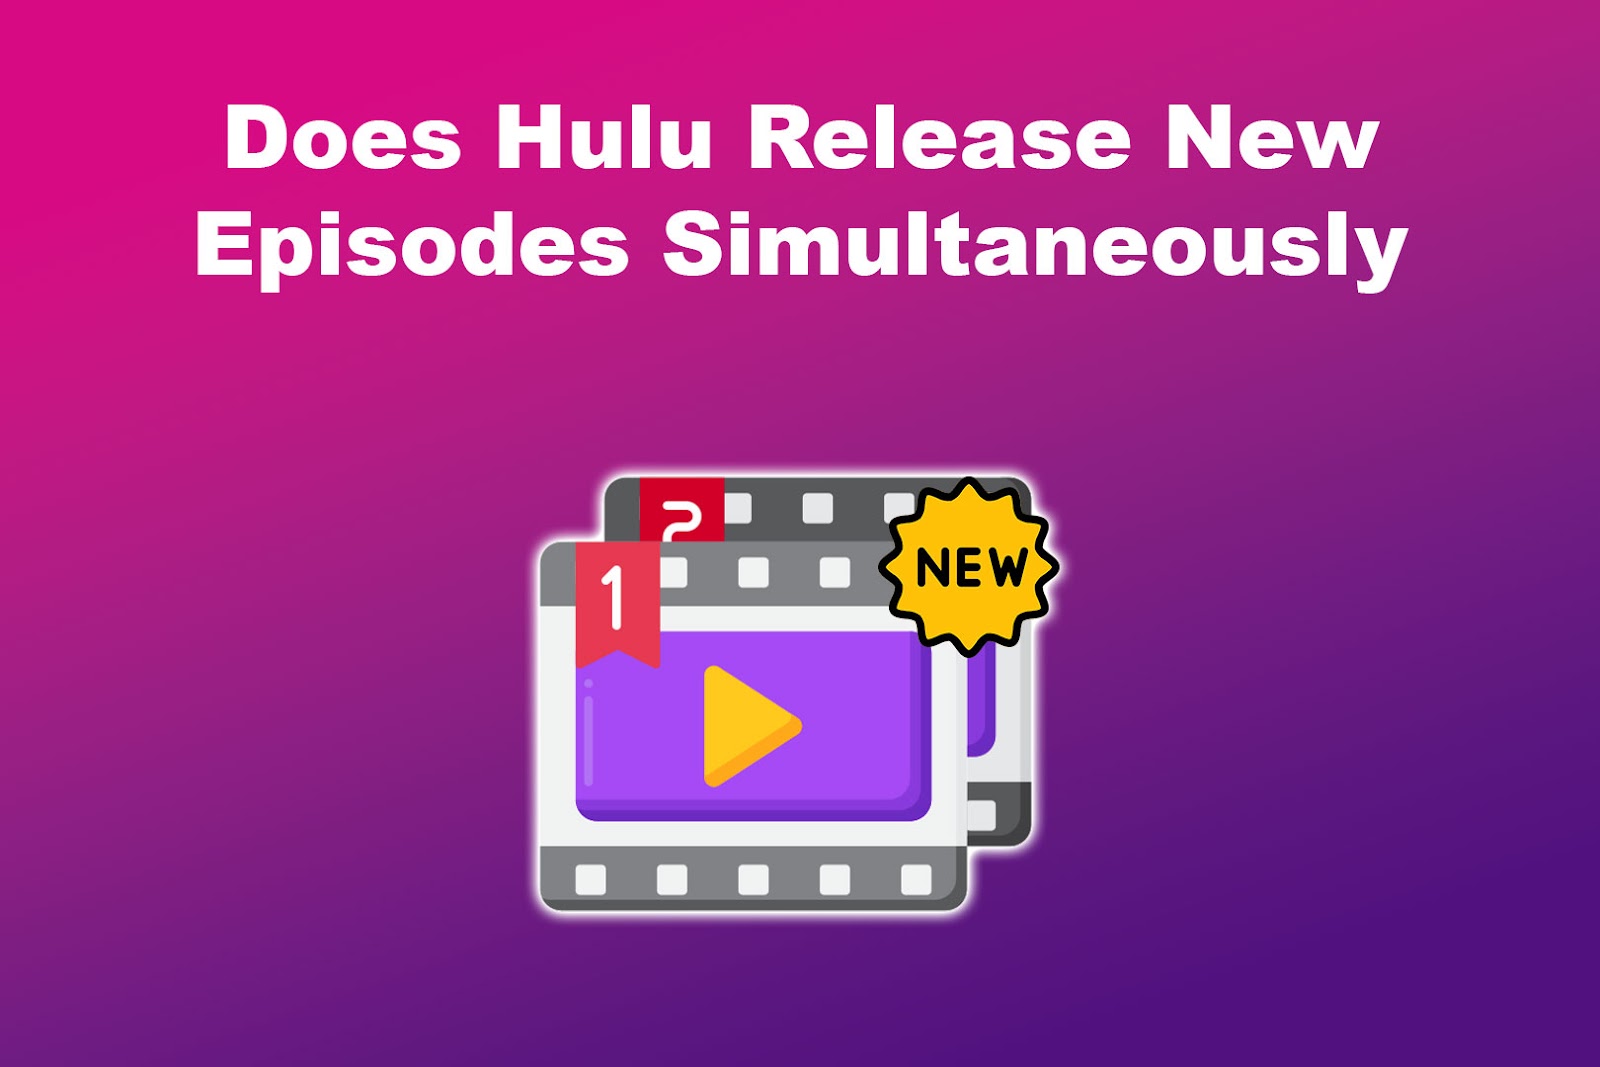 Does Hulu Release New Episodes Simultaneously